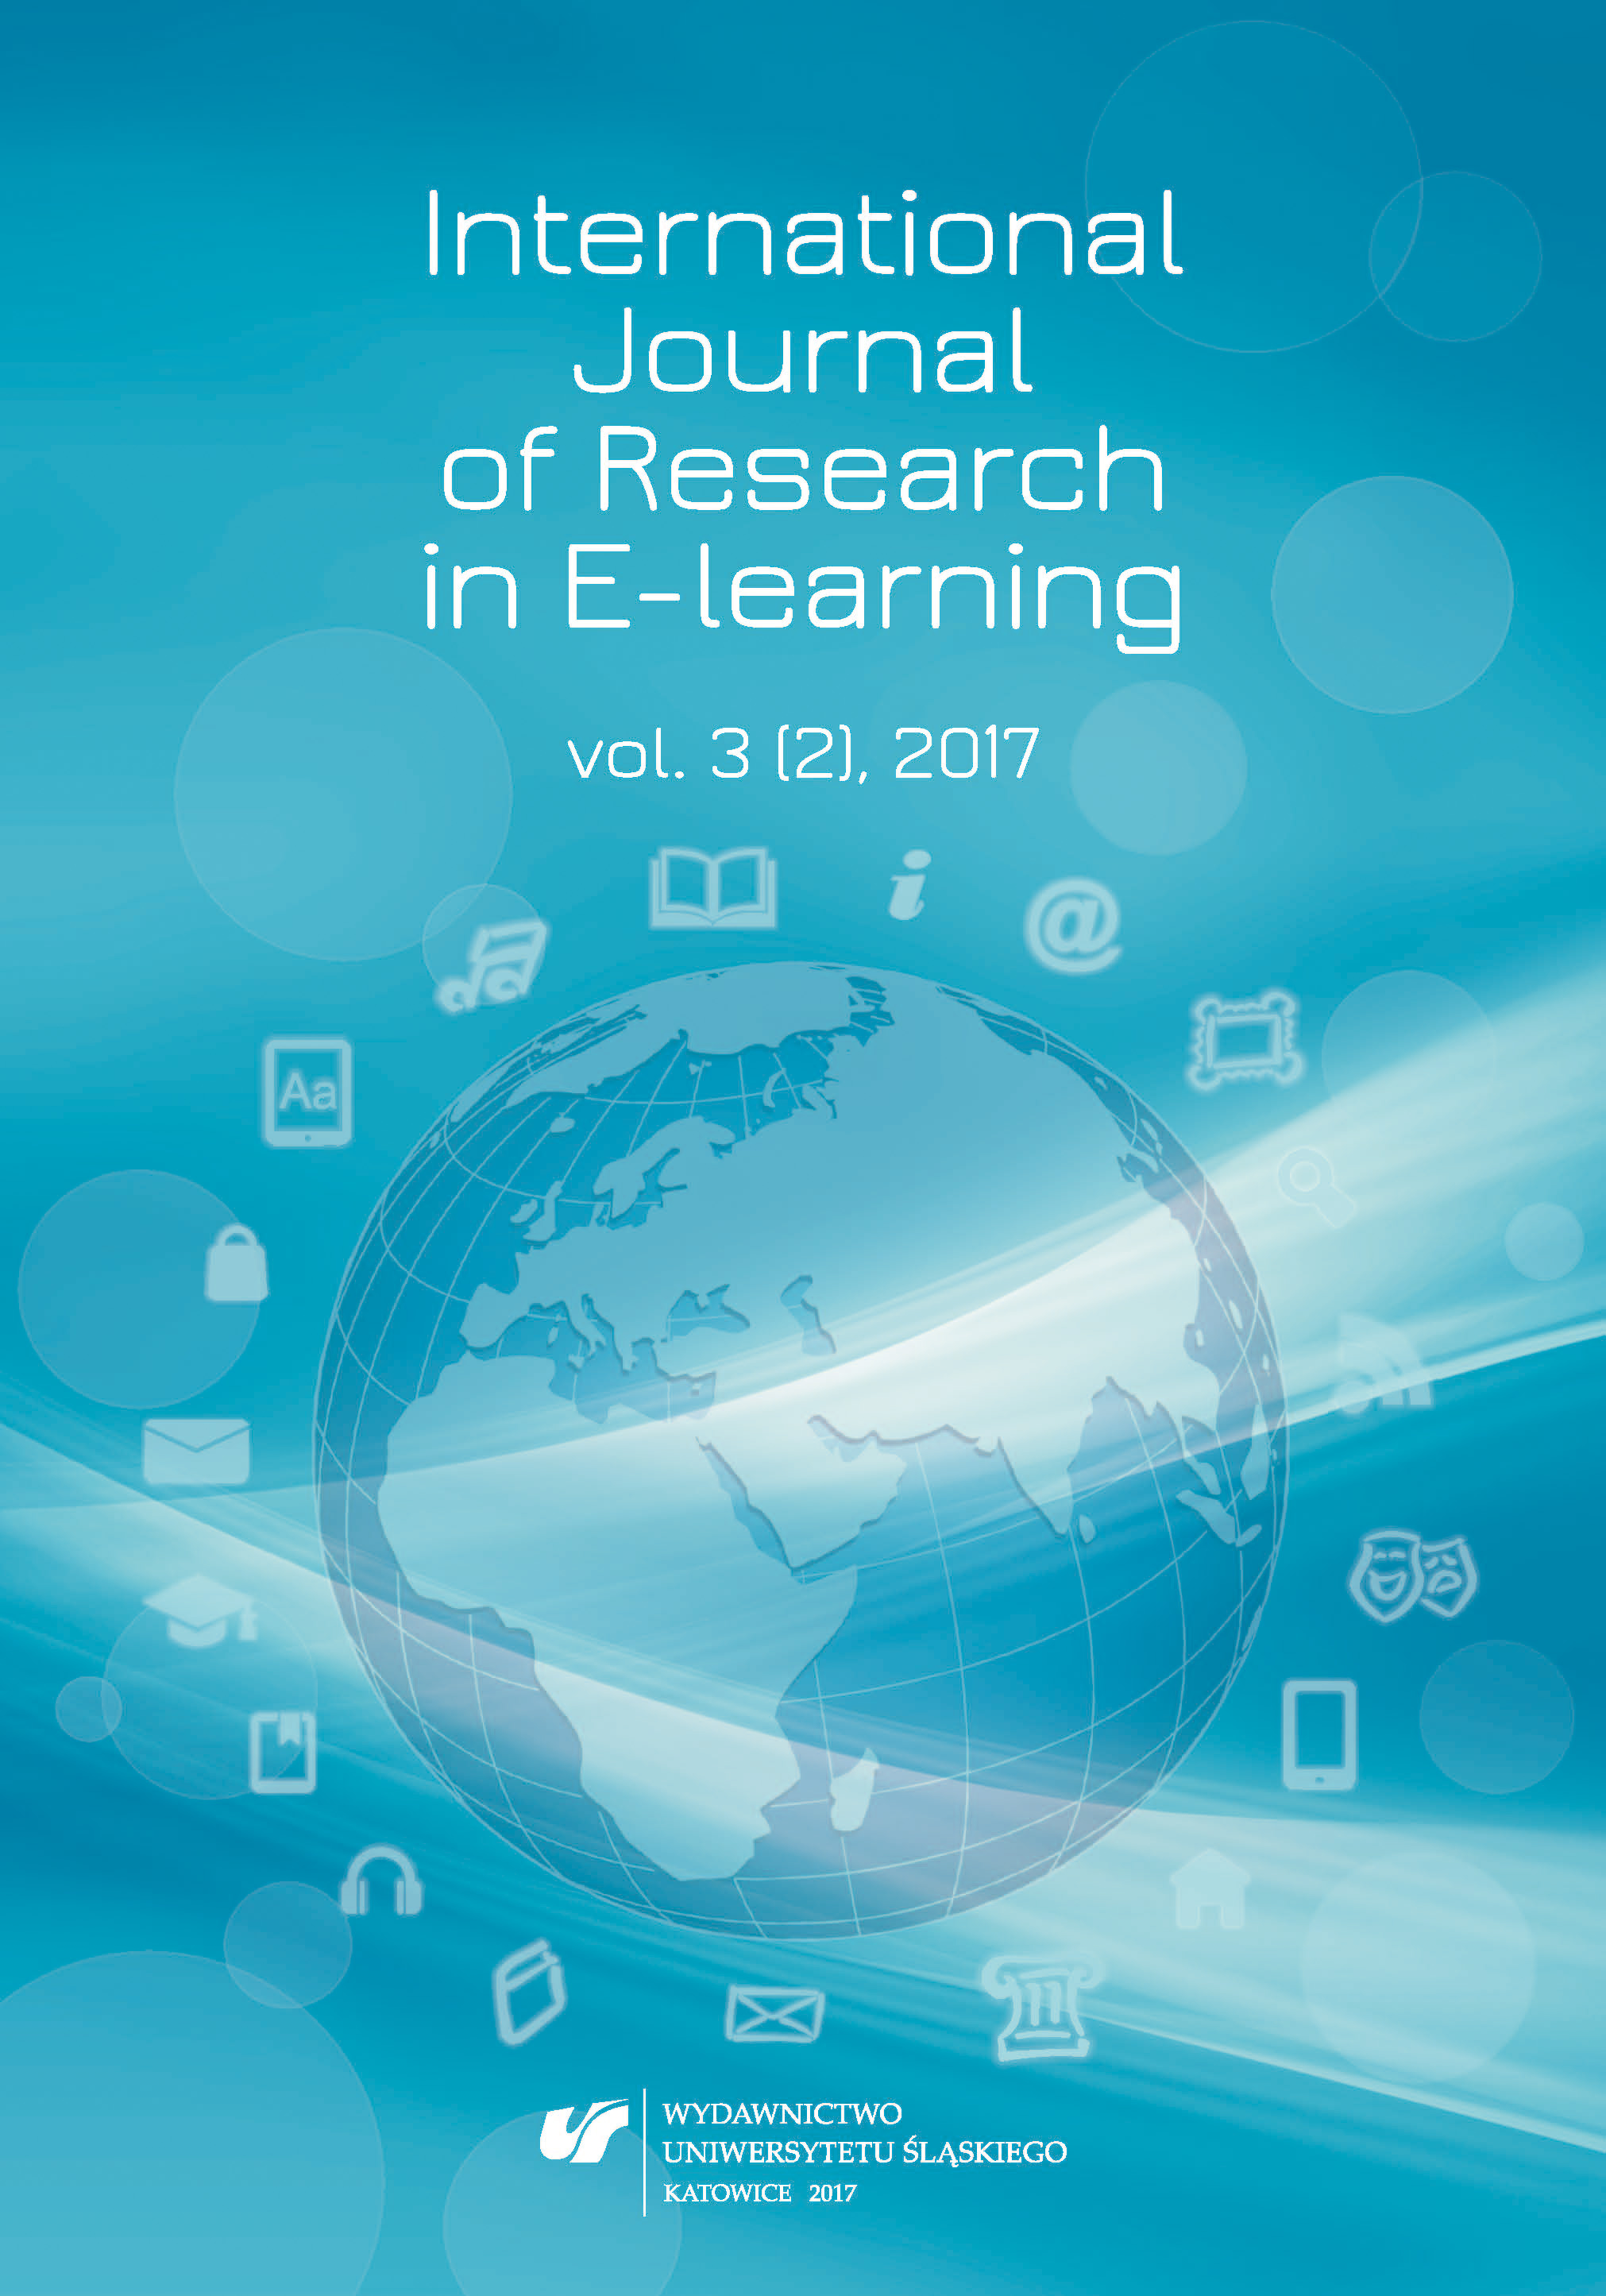 Evaluating the Effectiveness of Teaching Information Systems Courses: A Rasch Measurement Approach